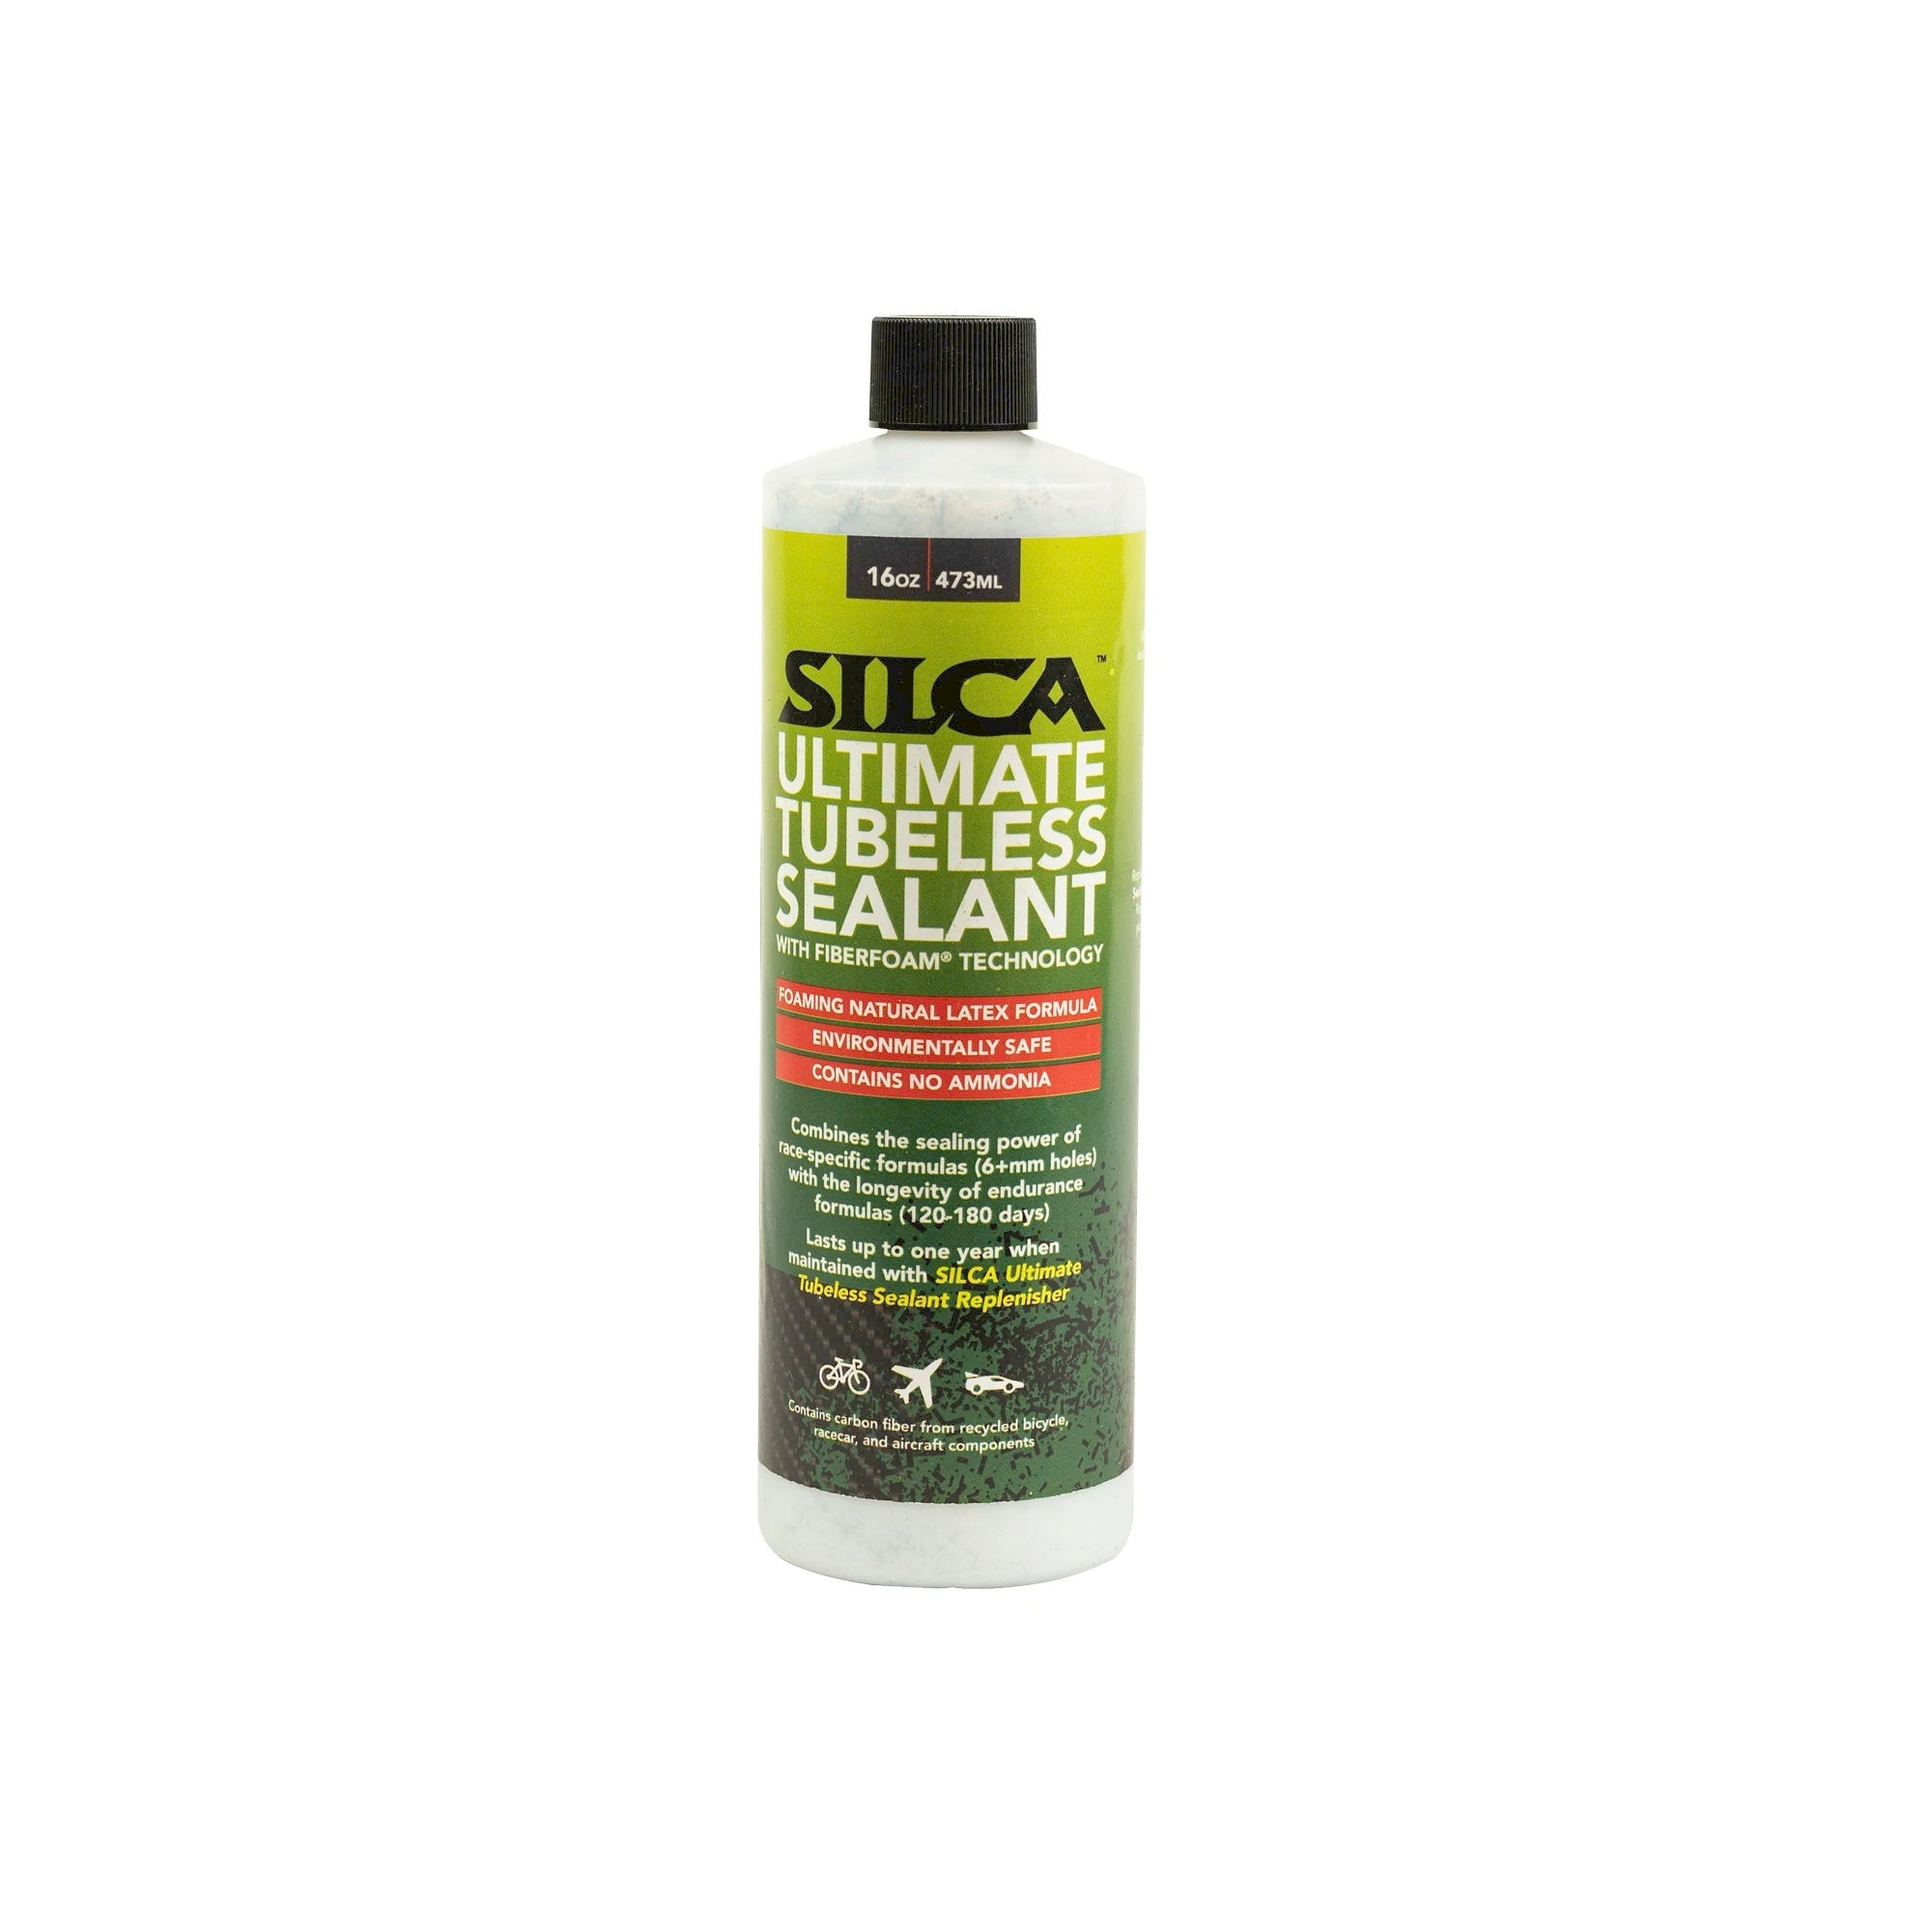 Product image for skus SIAMAC039ASY0100